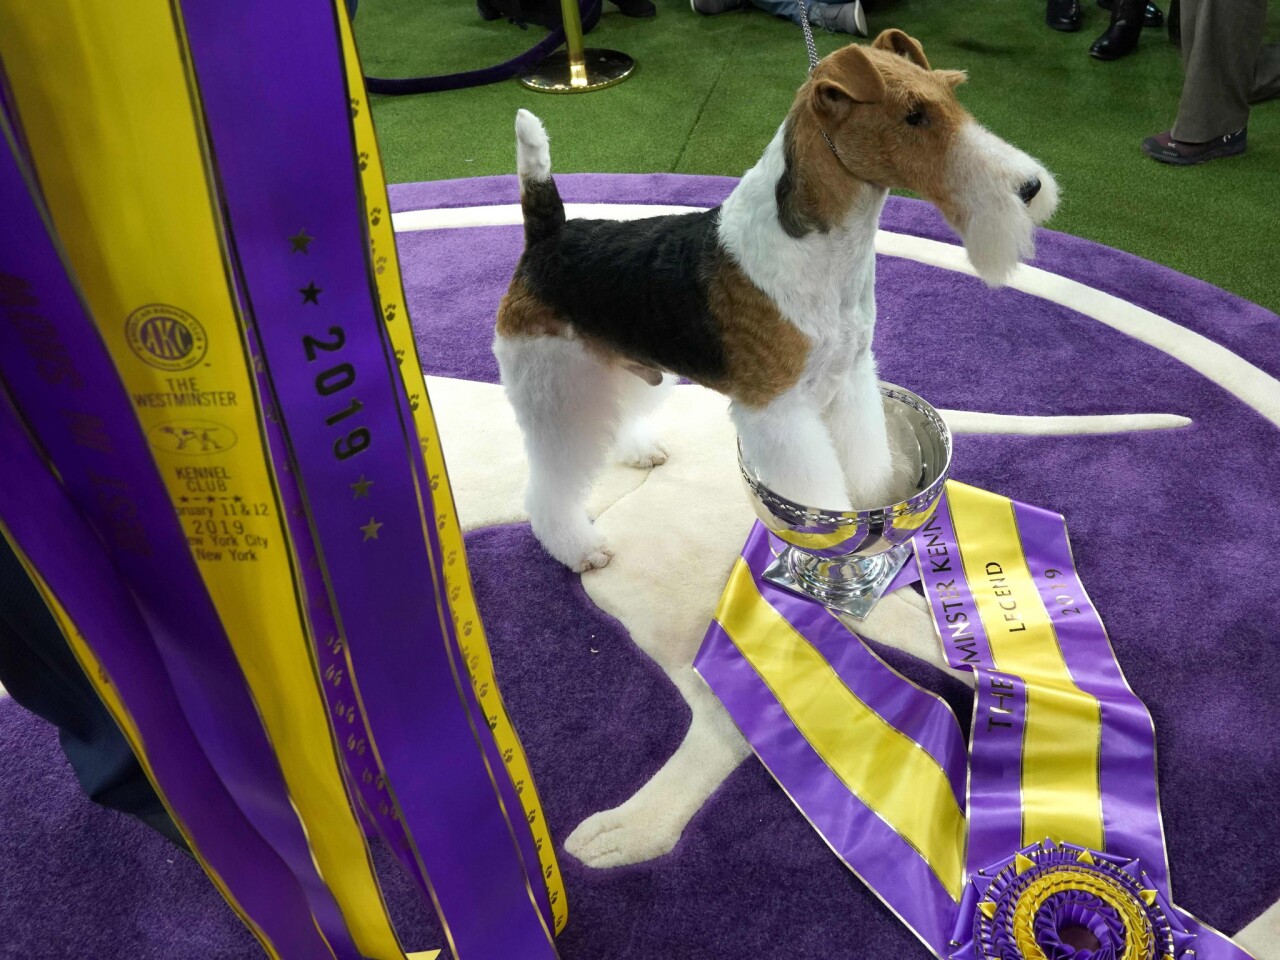 Best in Show The 143rd Westminster Kennel Club Dog Show in New York